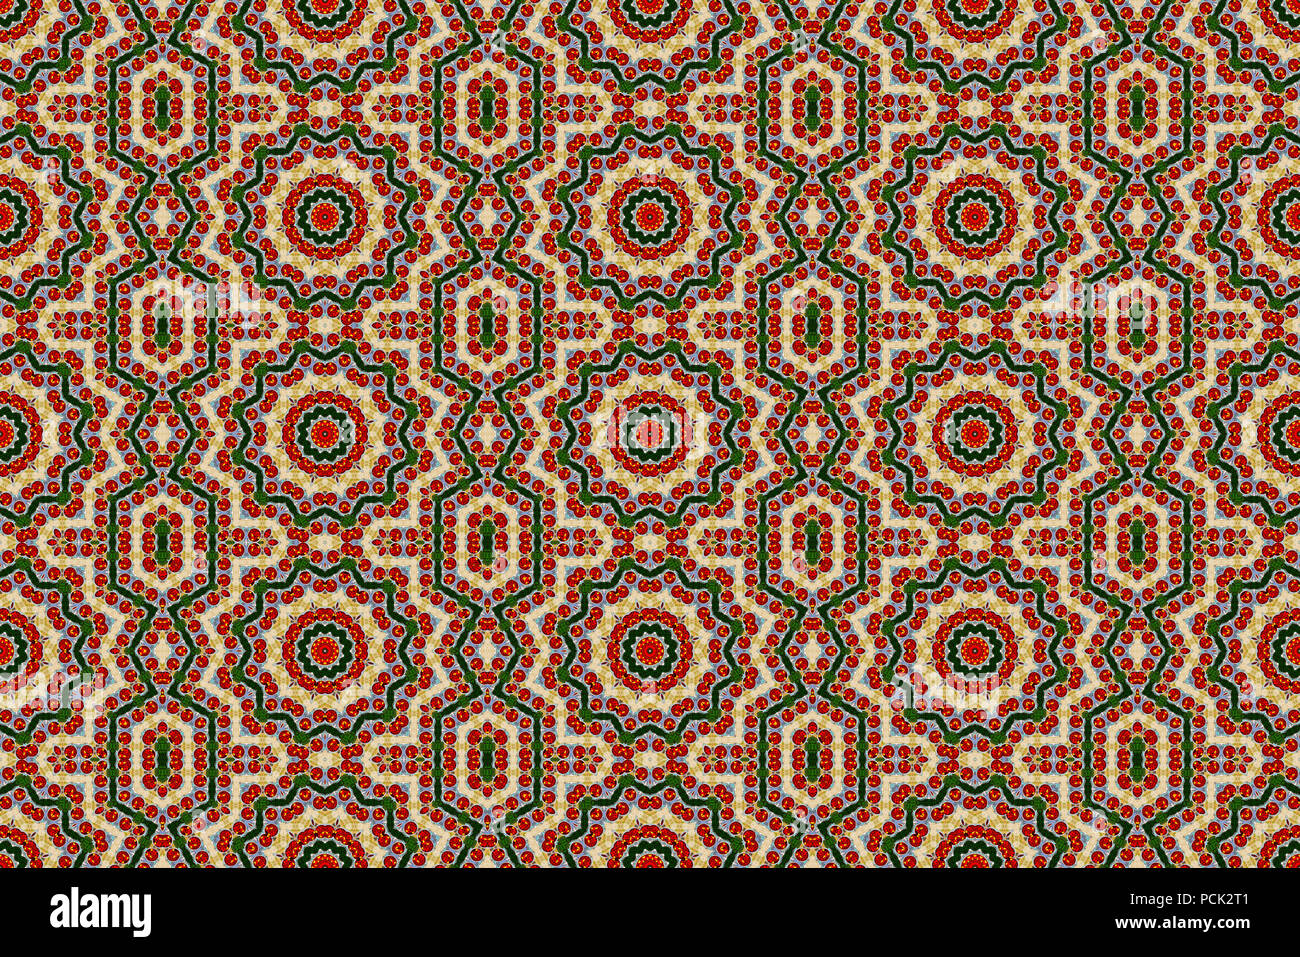 Seamless pattern background, repeating abstract kaleidoscope shape symmetrical backdrop for graphic design Stock Photo